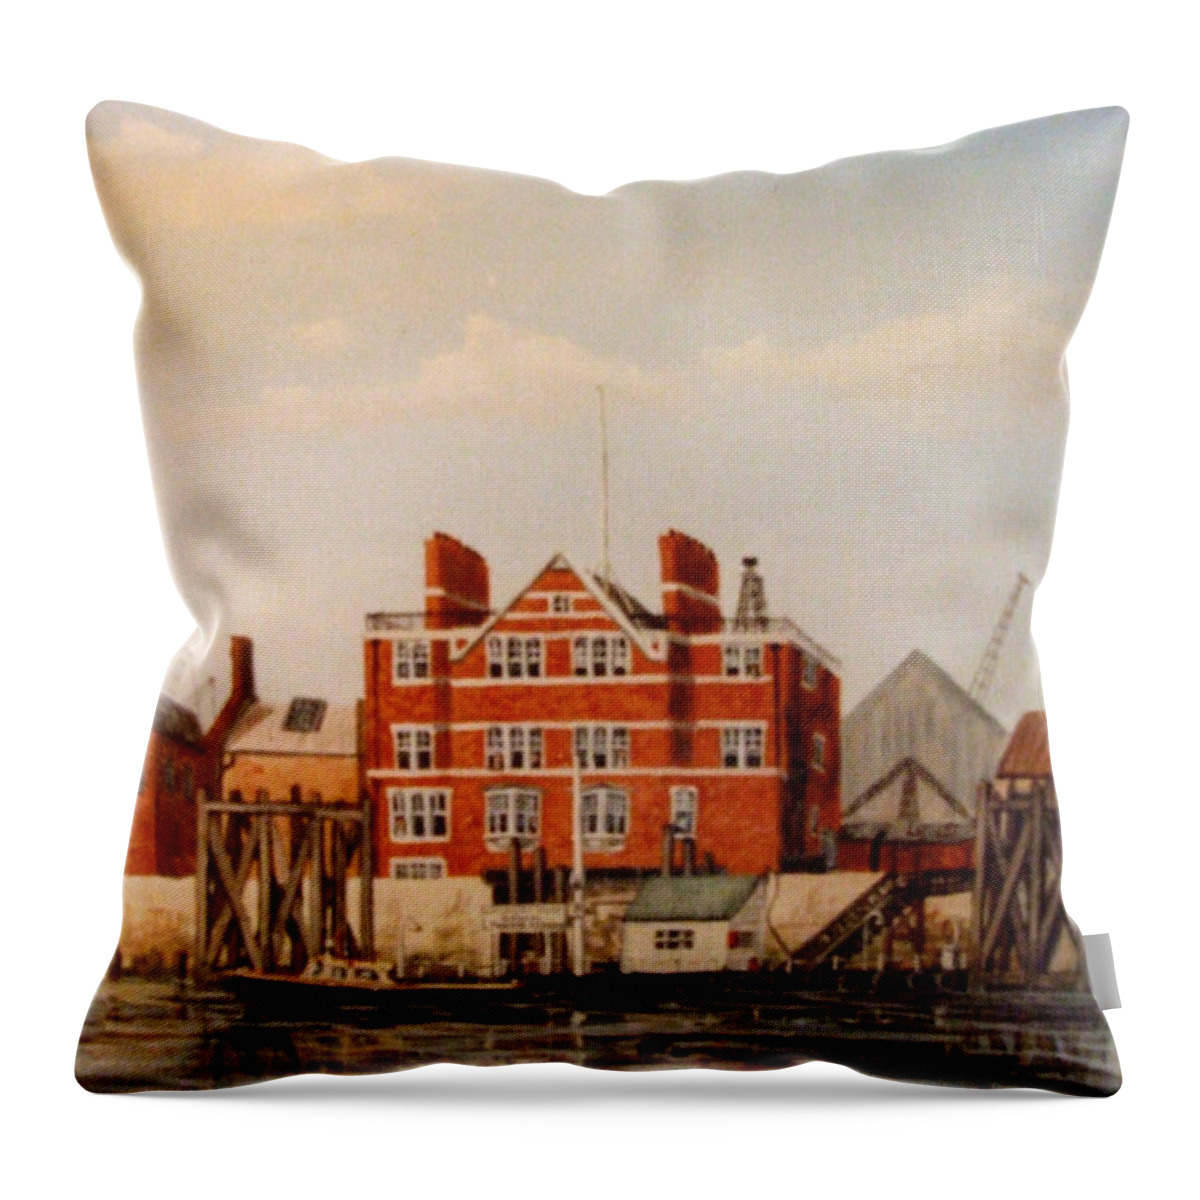 Blackwall Throw Pillow featuring the painting Blackwall Thames Police Station London by Mackenzie Moulton